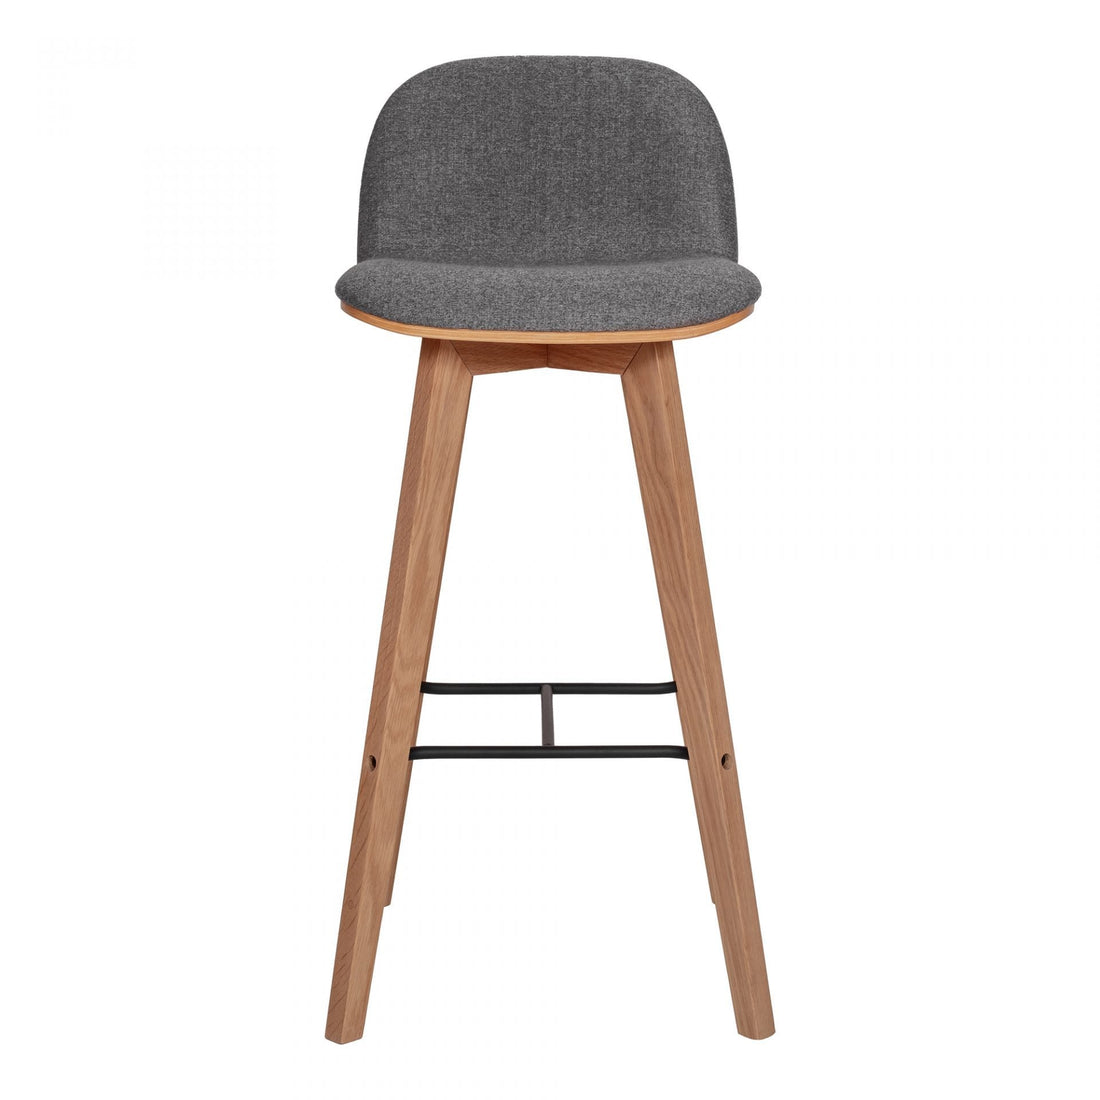 Barstool: Elevated Seating with Style